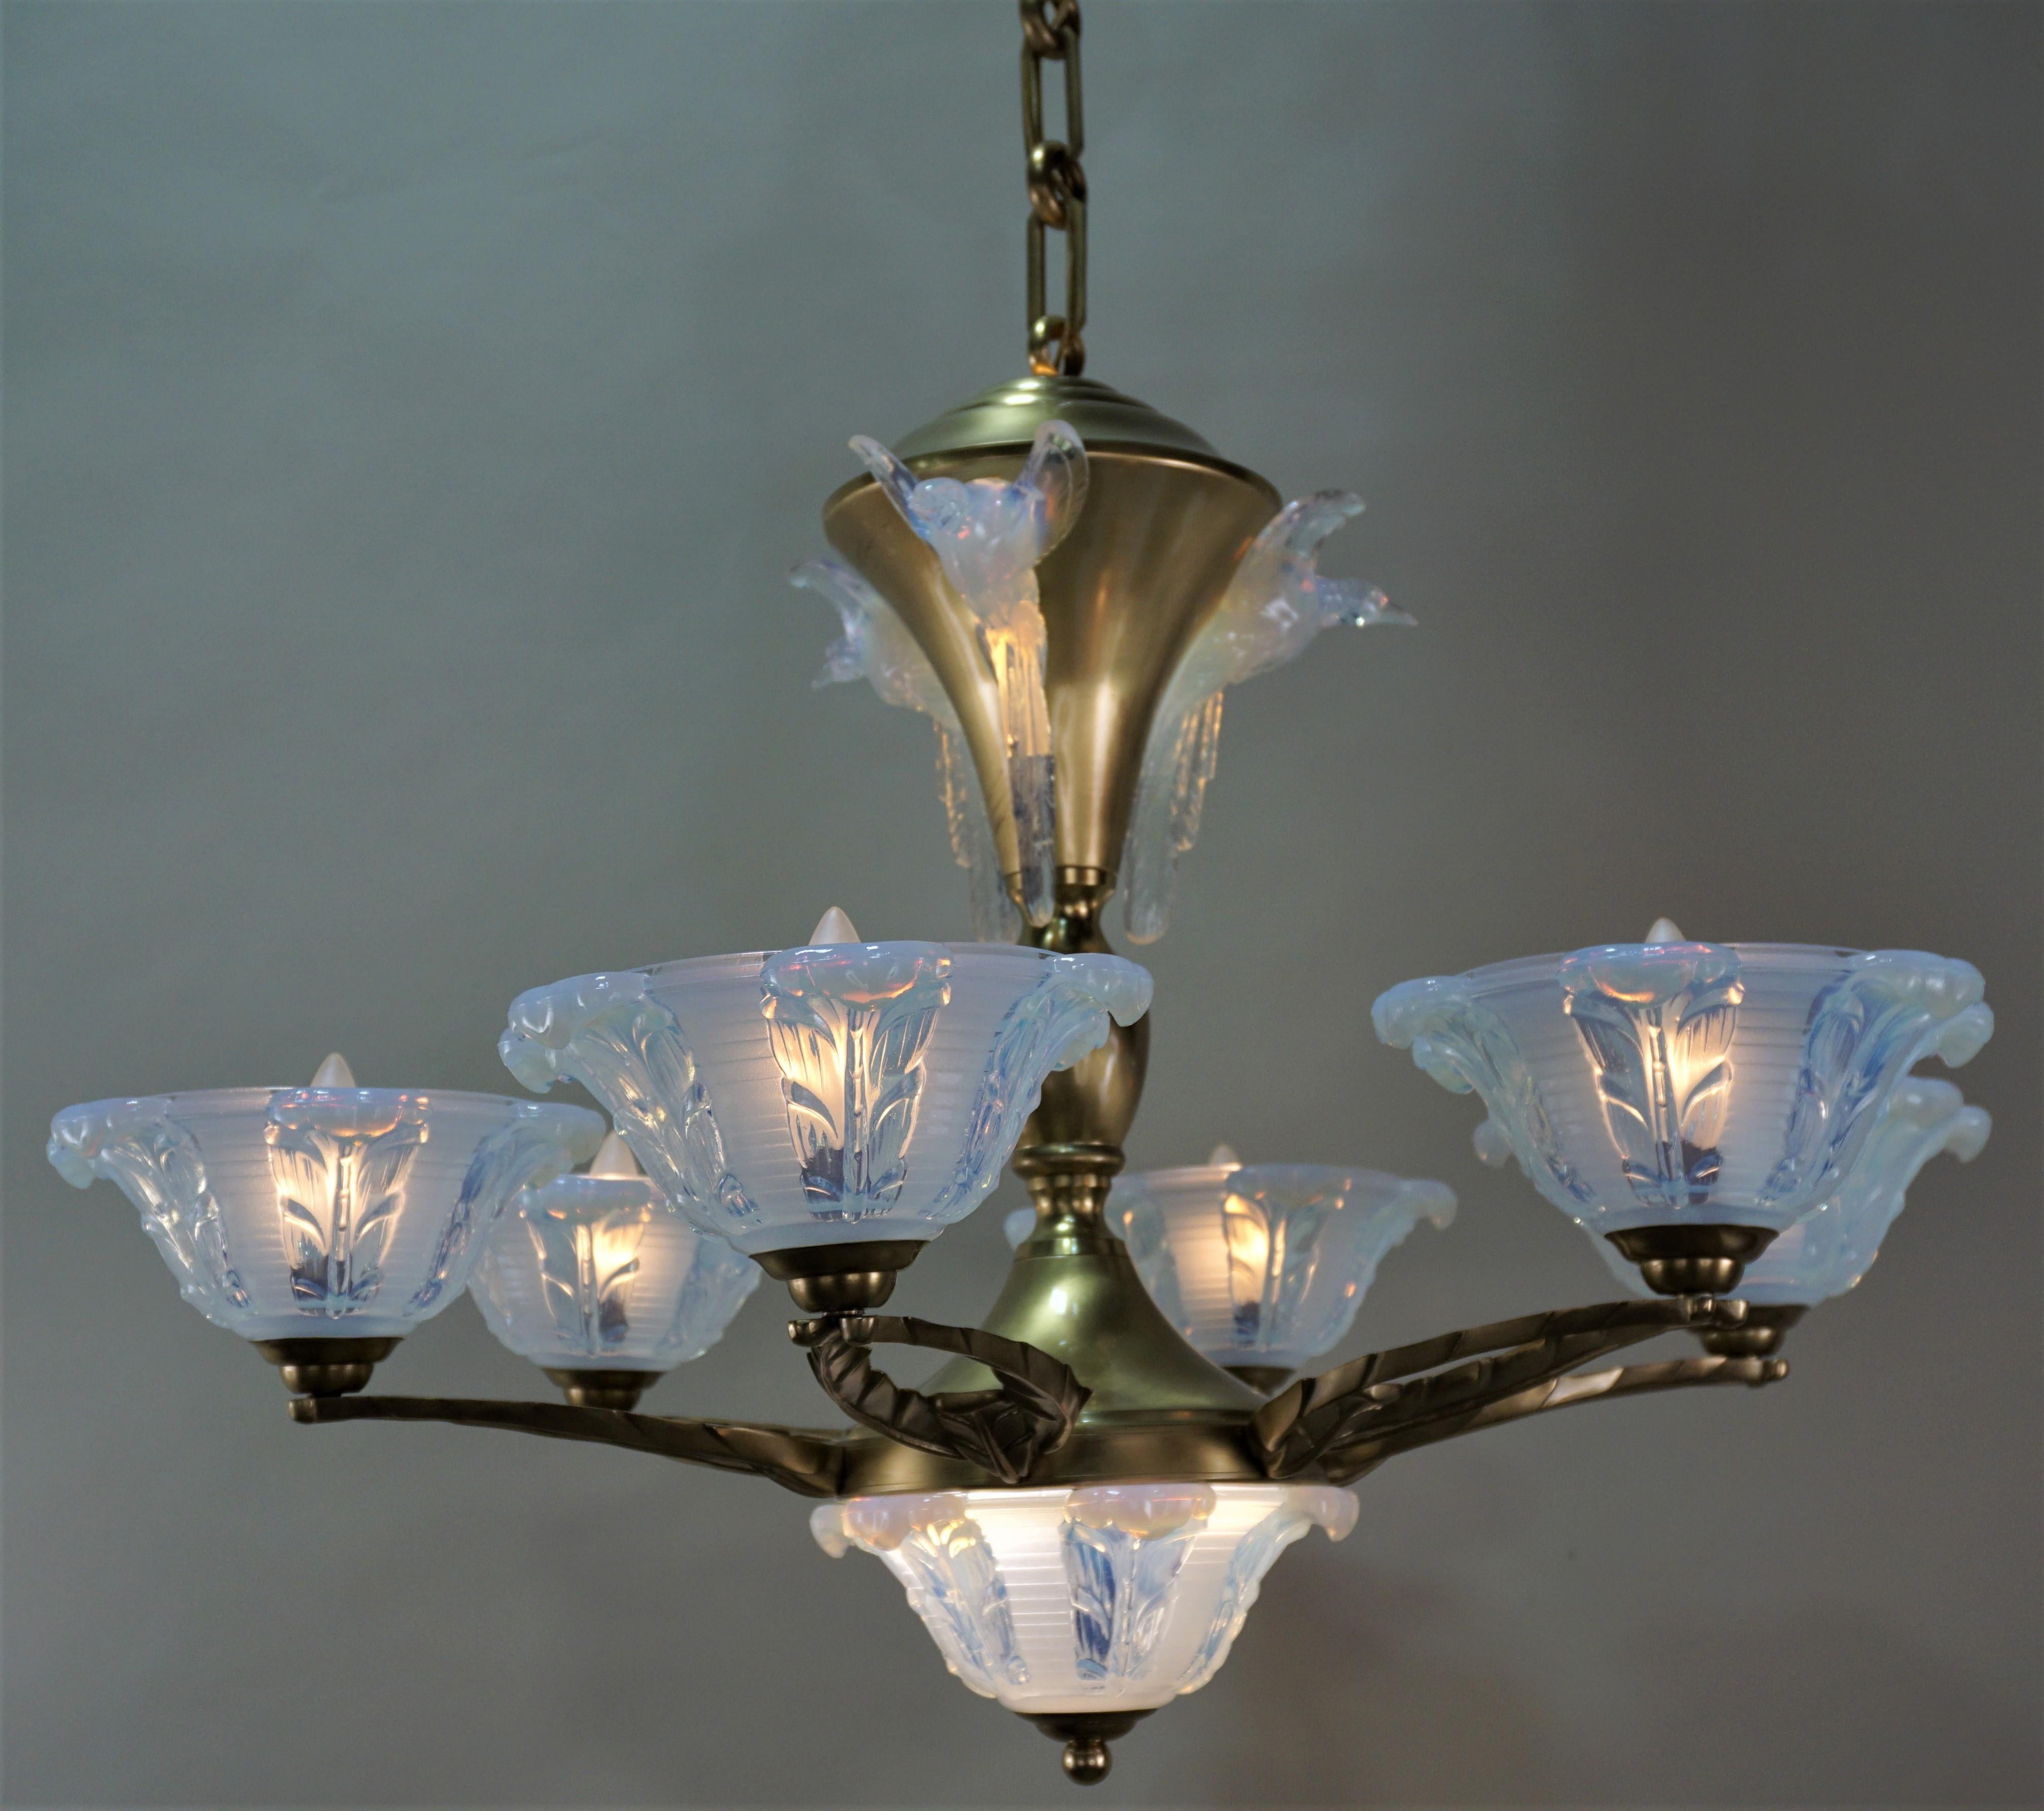 French Art Deco Chandelier with Opalescent Glass Shades by Ezan 2